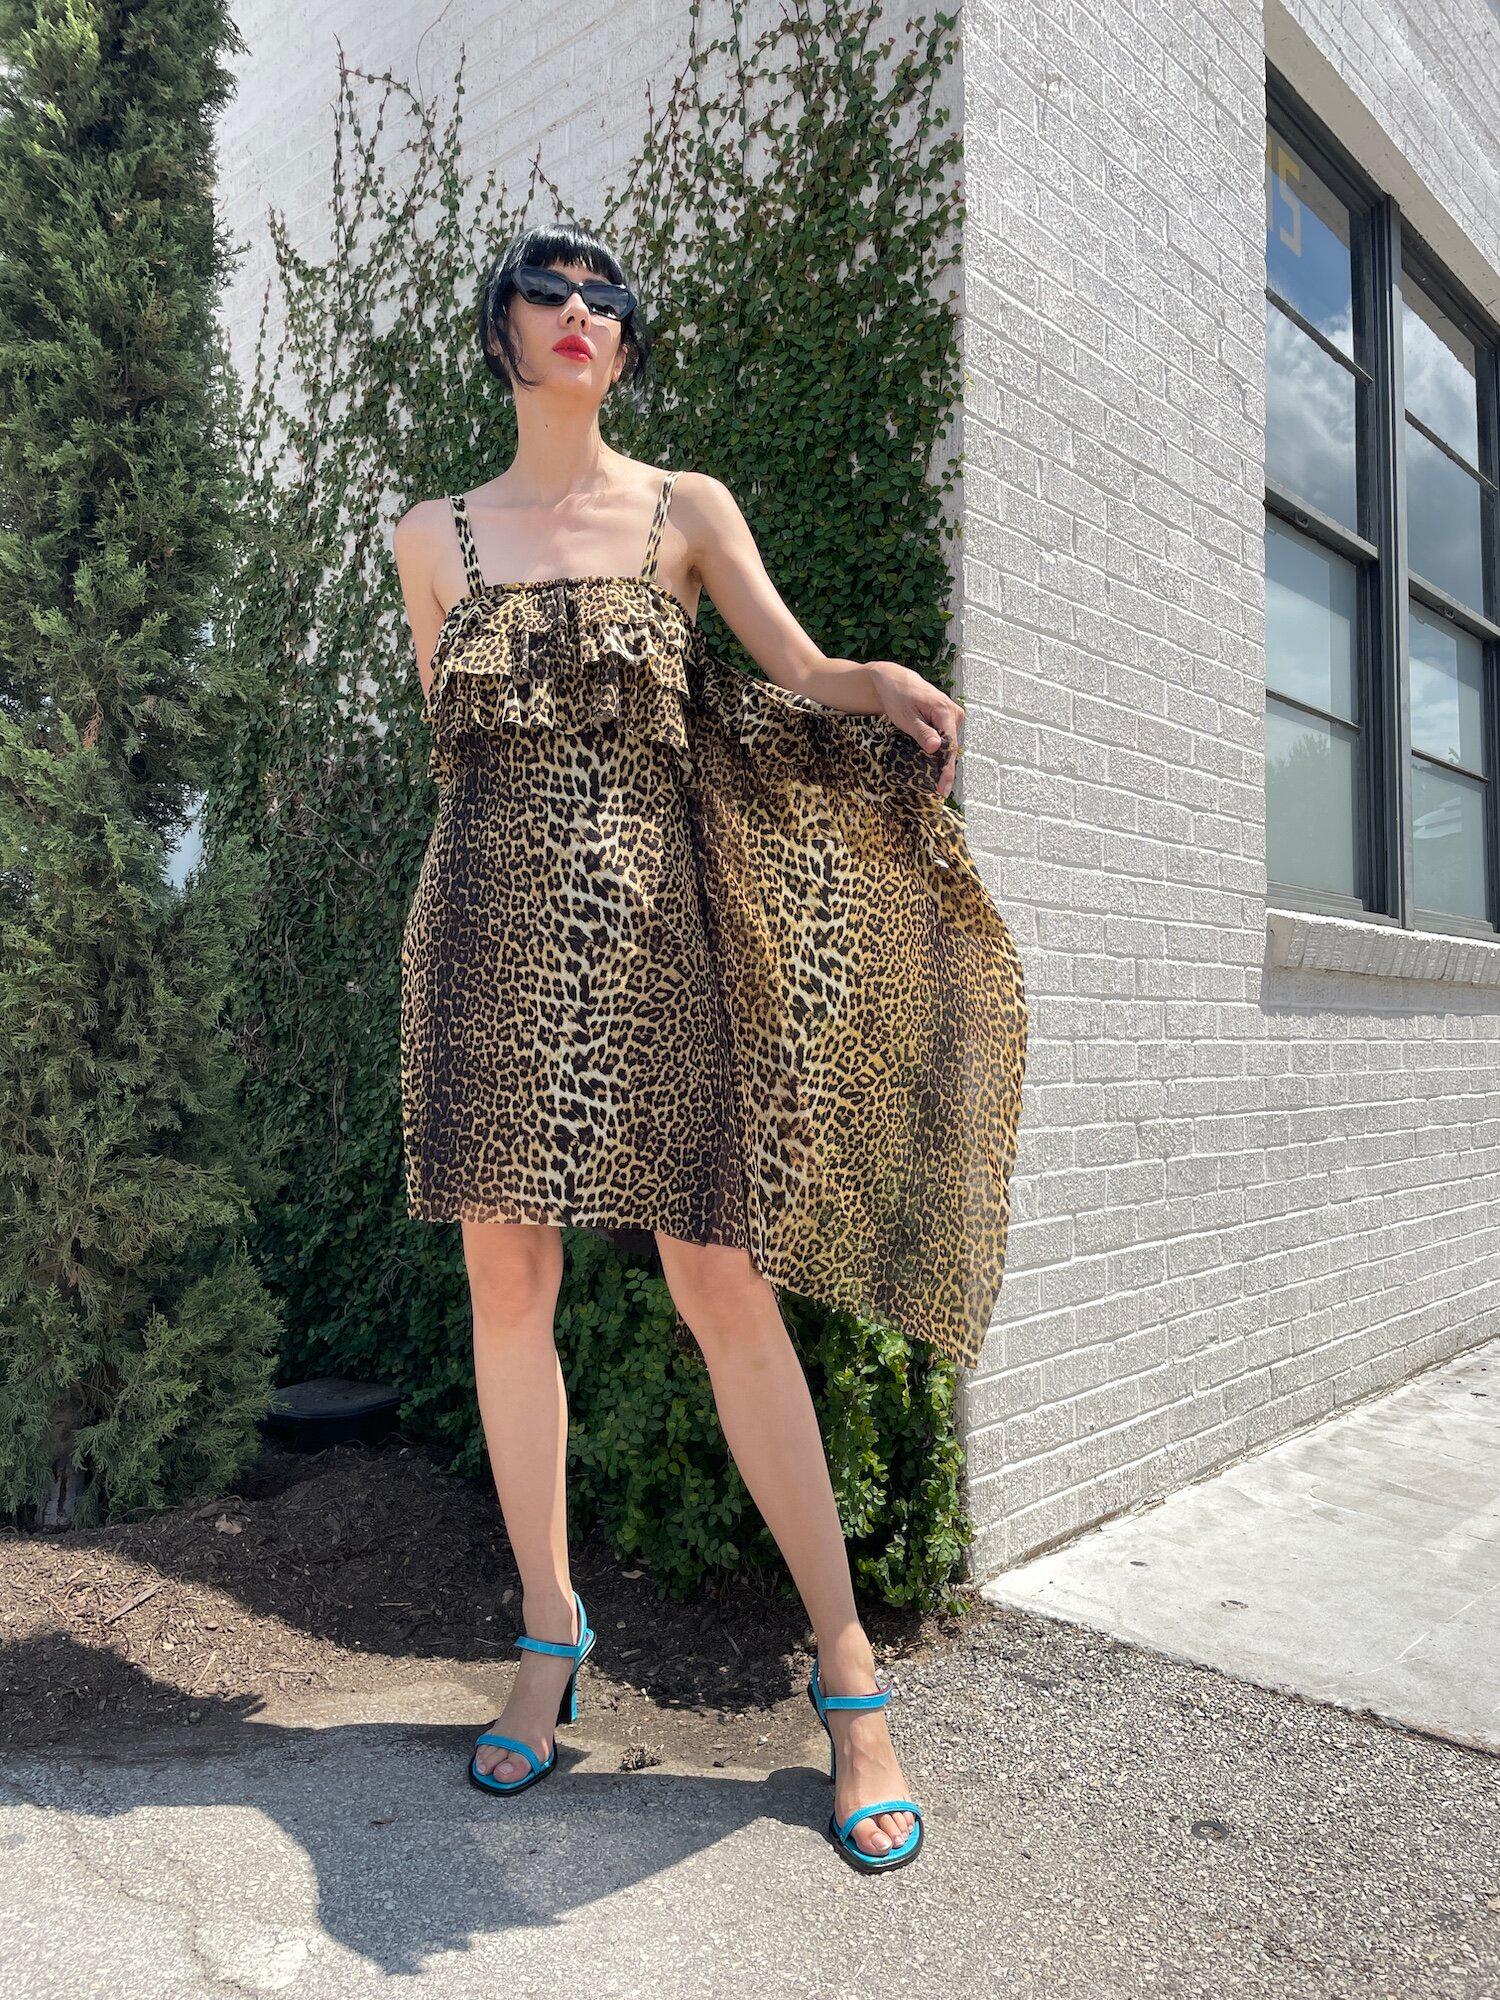 Vintage Jean Paul Gaultier 1990s Leopard Asymmetrical Cheetah Animal Print 90s Mesh Ruffled Midi Dress
This party dress features an all over animal print with a long asymmetrical ruffle running down the left side. The bust also features rows of